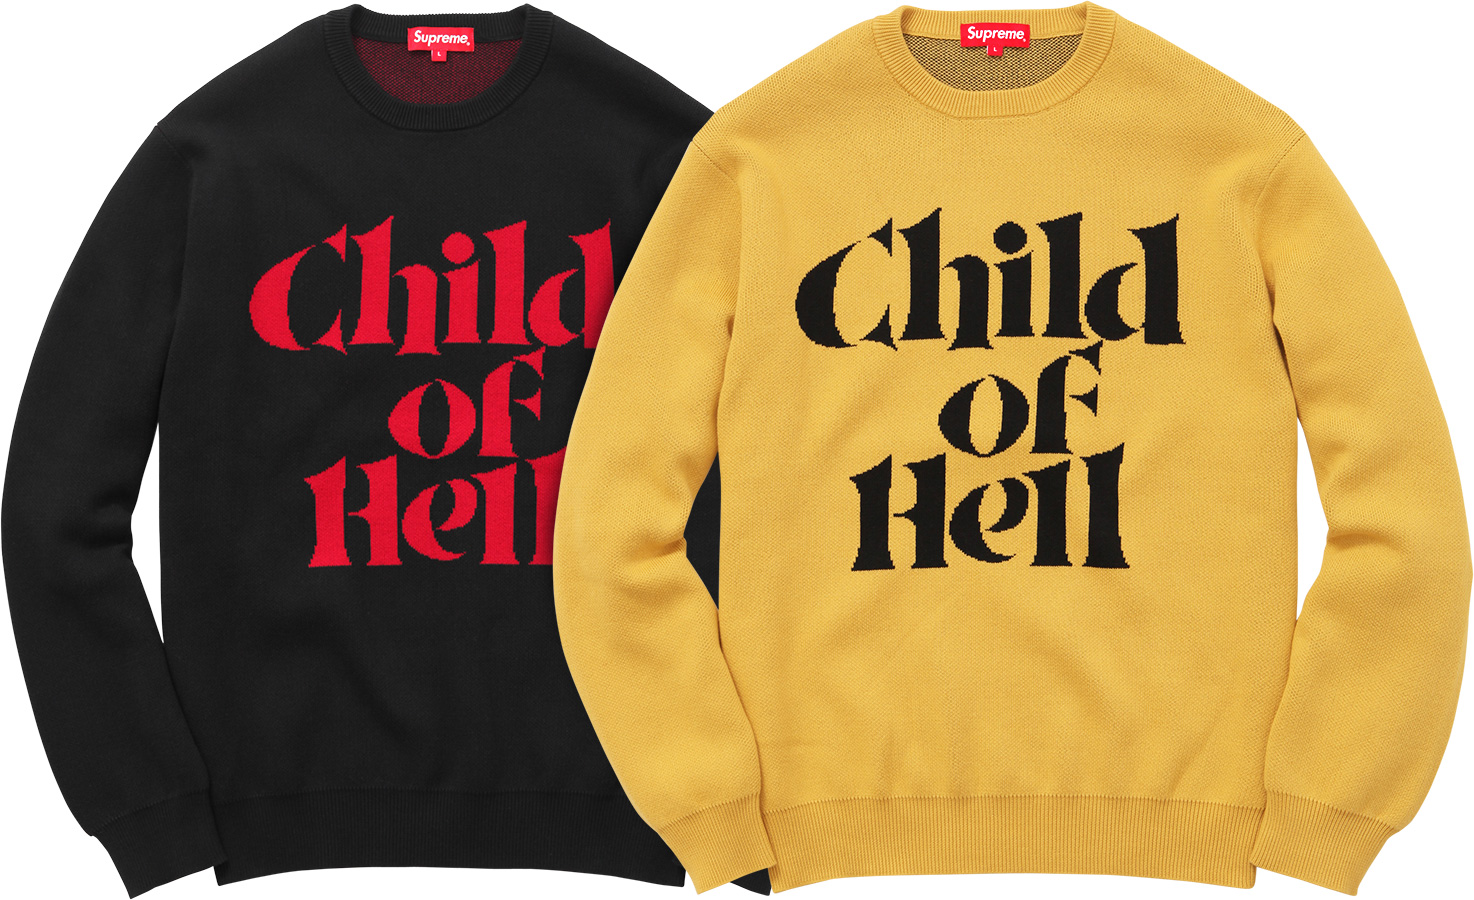 Child of Hell Sweater - fall winter 2015 - Supreme